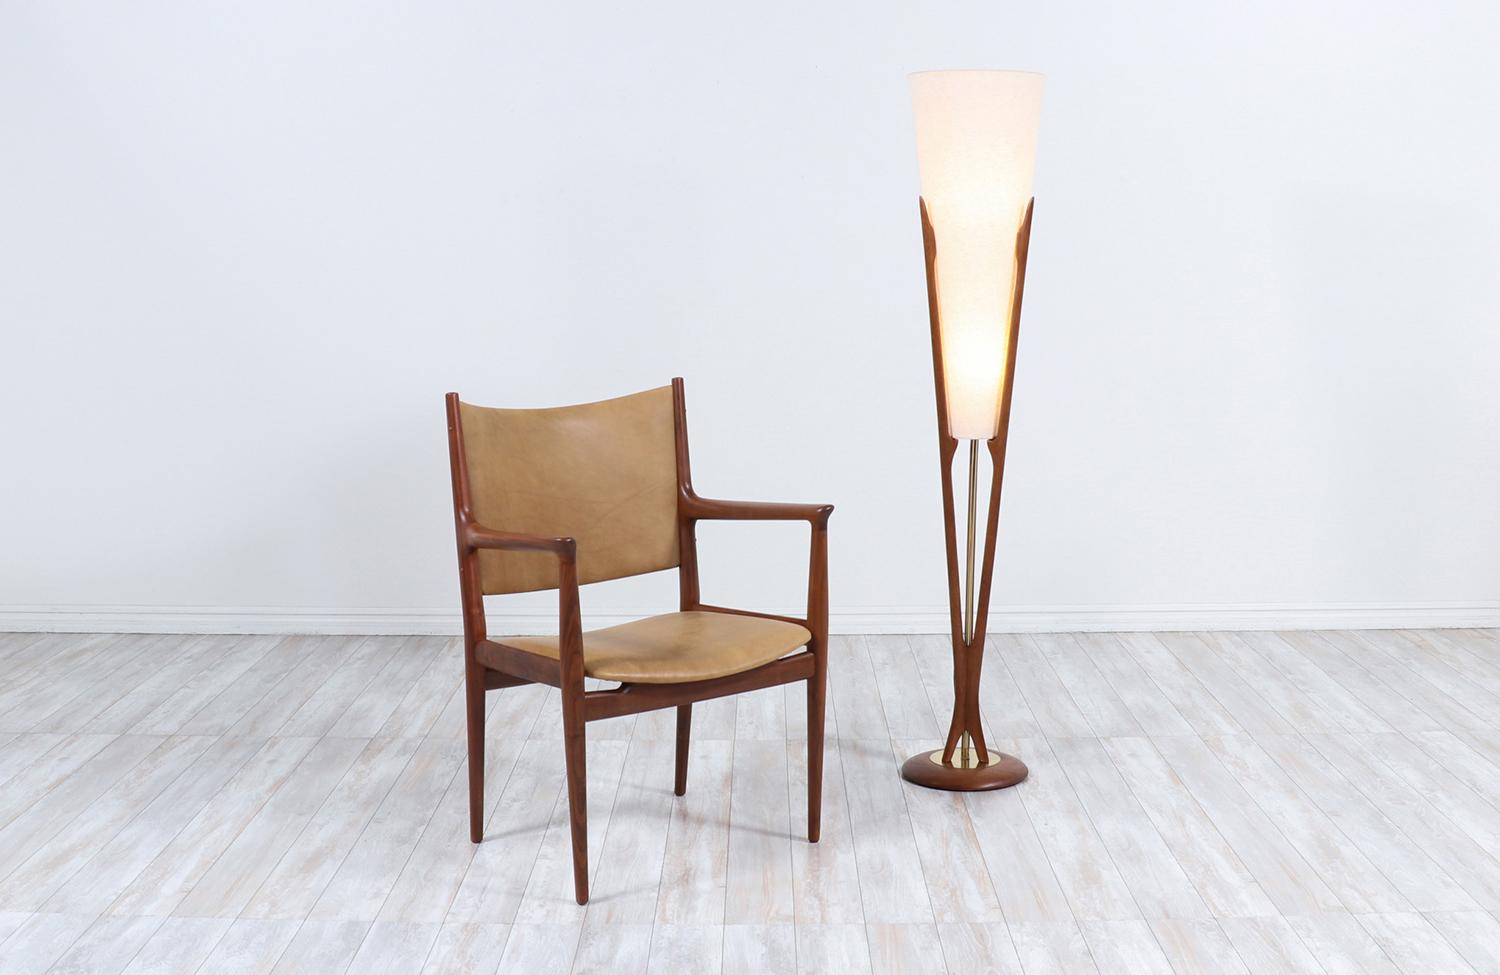 Stunning sculpted modern floor lamp designed by John Keal and manufactured by Modeline of California in the United States circa 1960s. This rare floor lamp is comprised of a carved walnut wood frame that connects from the top to the rounded base